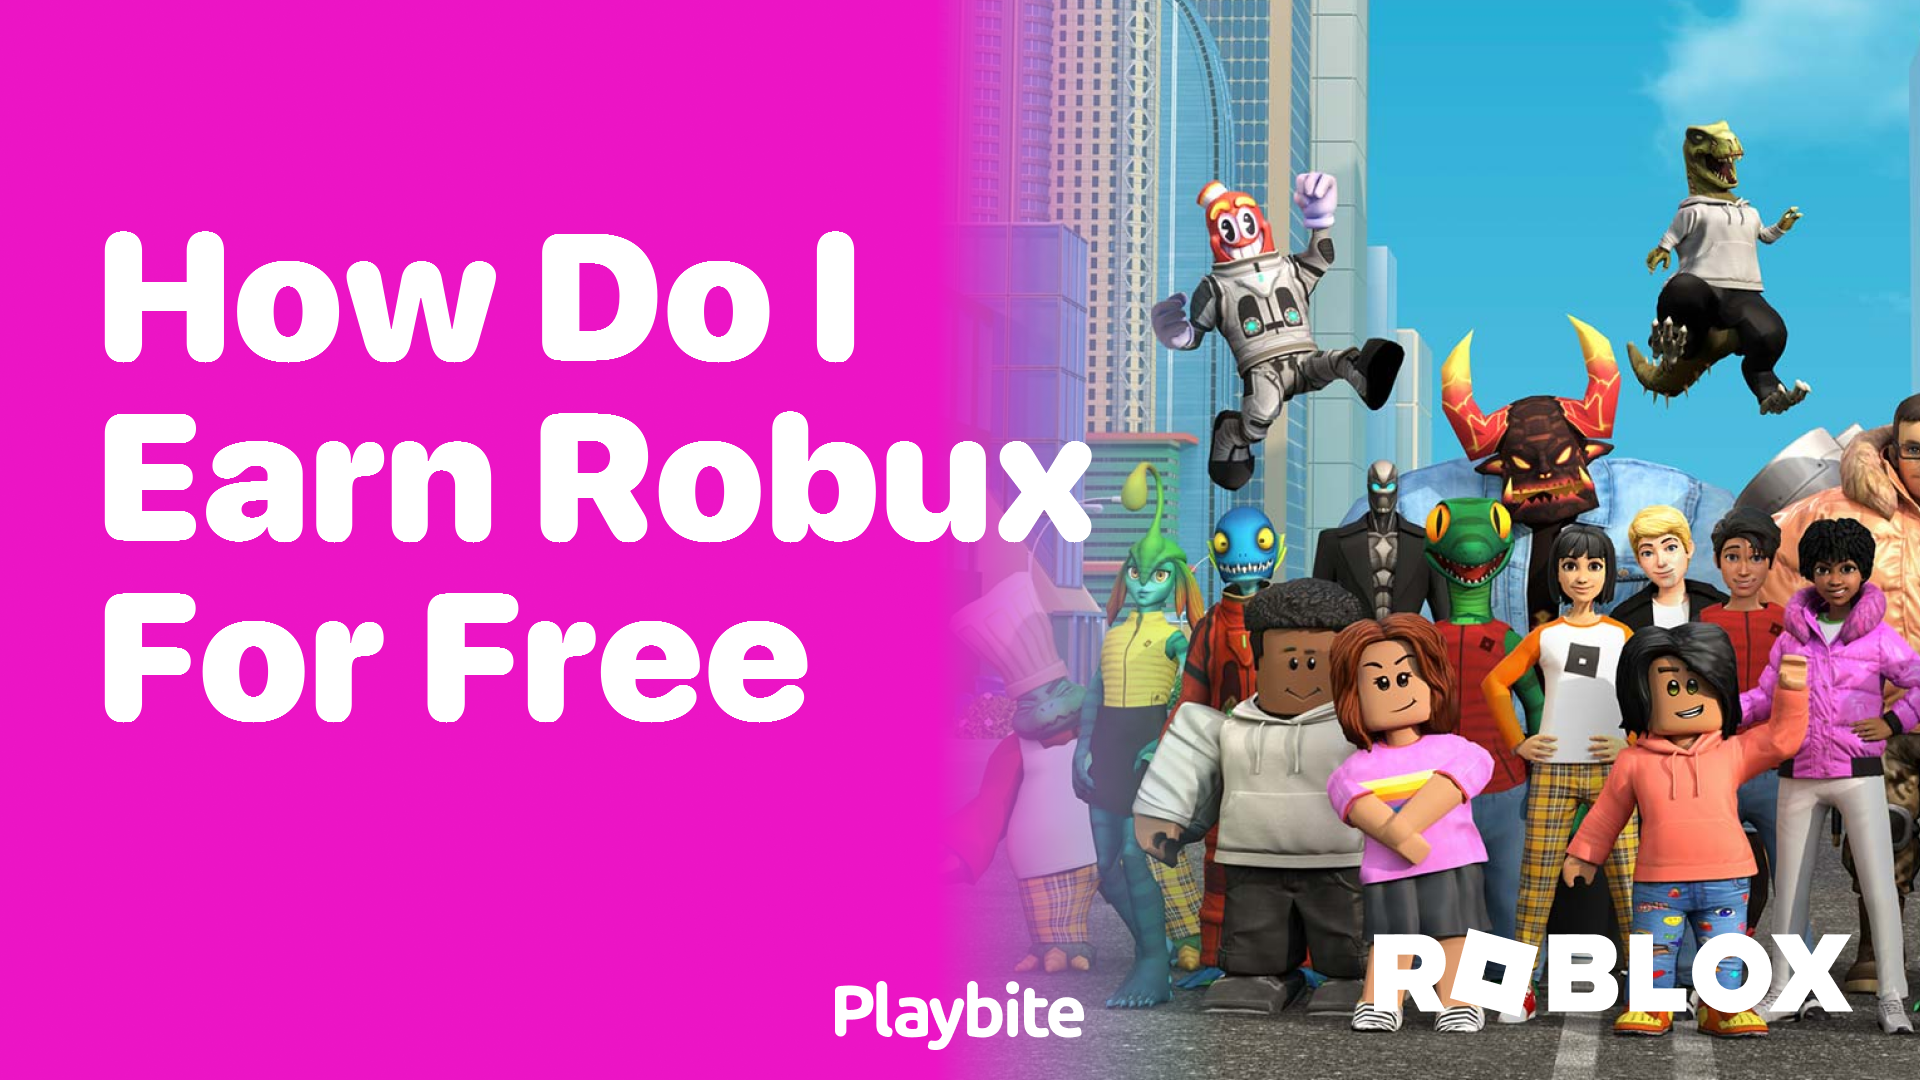 How Do I Earn Robux for Free?